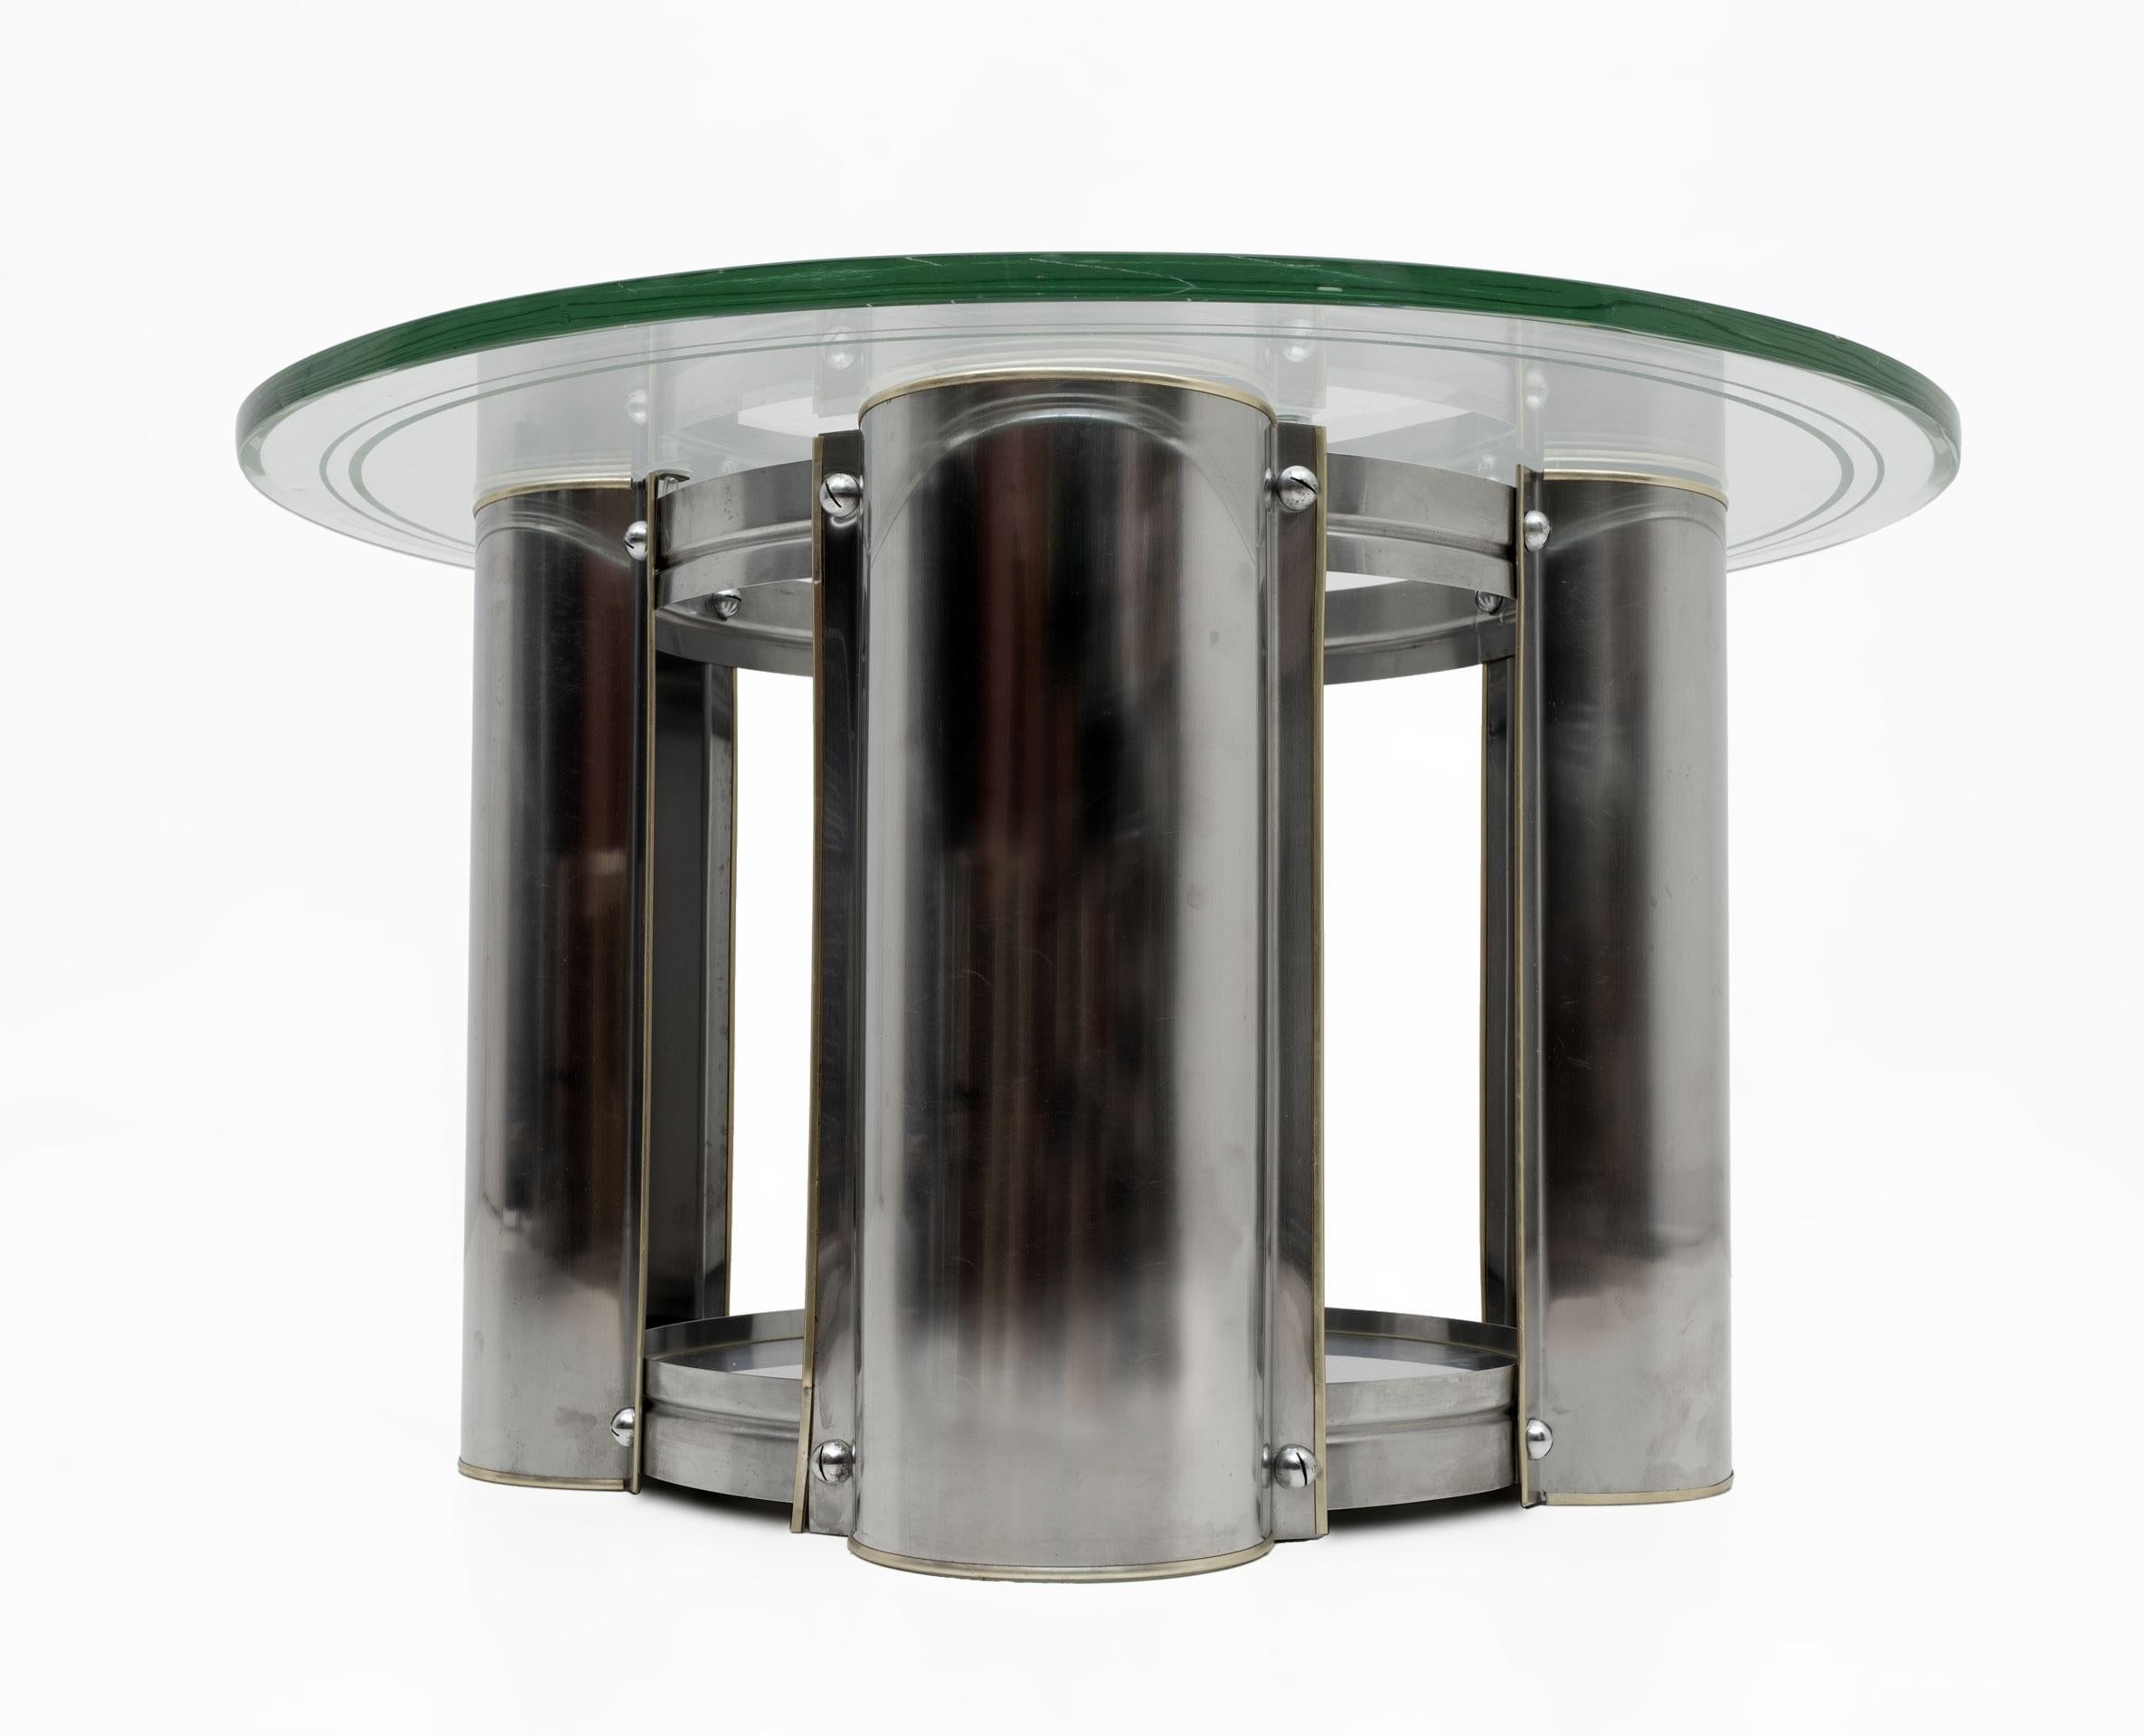 Mid-century Modern Italian Steel and Glass Round Coffee Table, 1970s For Sale 1